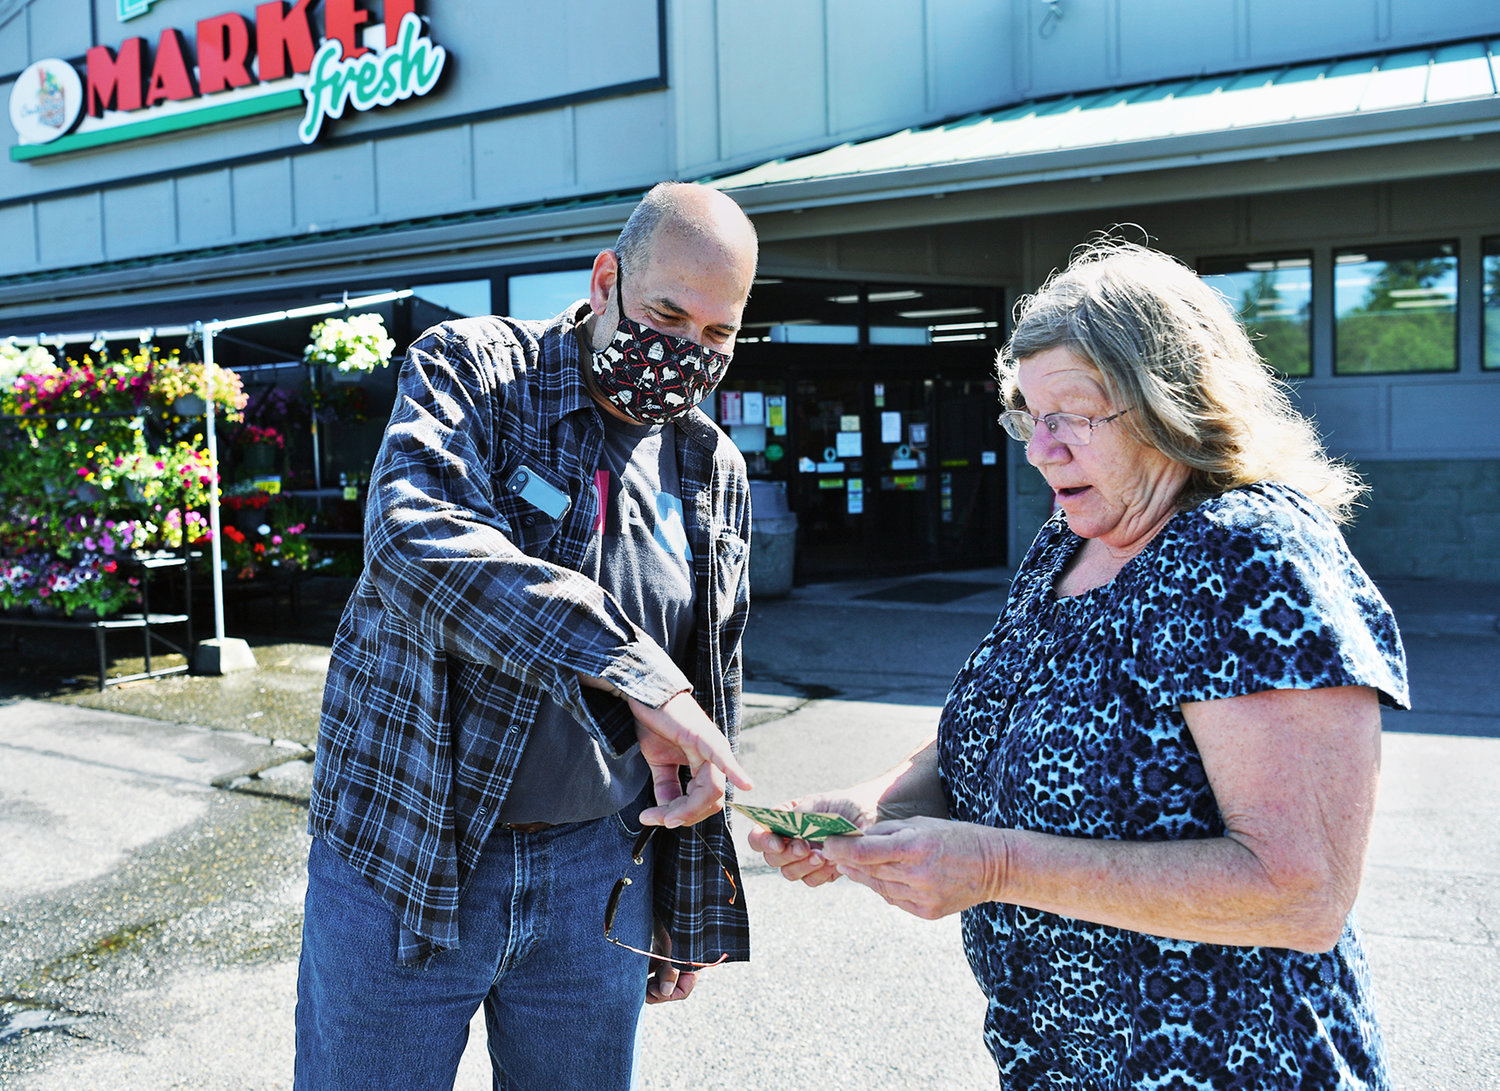 Franc Sawatzki, 55, from Whidbey Island, traveled to Tenino on Friday, June 26, to see if you could buy three scrips of Tenino wooden money. He wanted them as souvenirs for himself and family members. As luck would have it, Tenino resident Lauretta Mahlenbrei happened to be at Market Fresh at the same time with one of the four scrips she still has. Despite Sawatzki's cajoling, Mahlenbrei refused to sell.